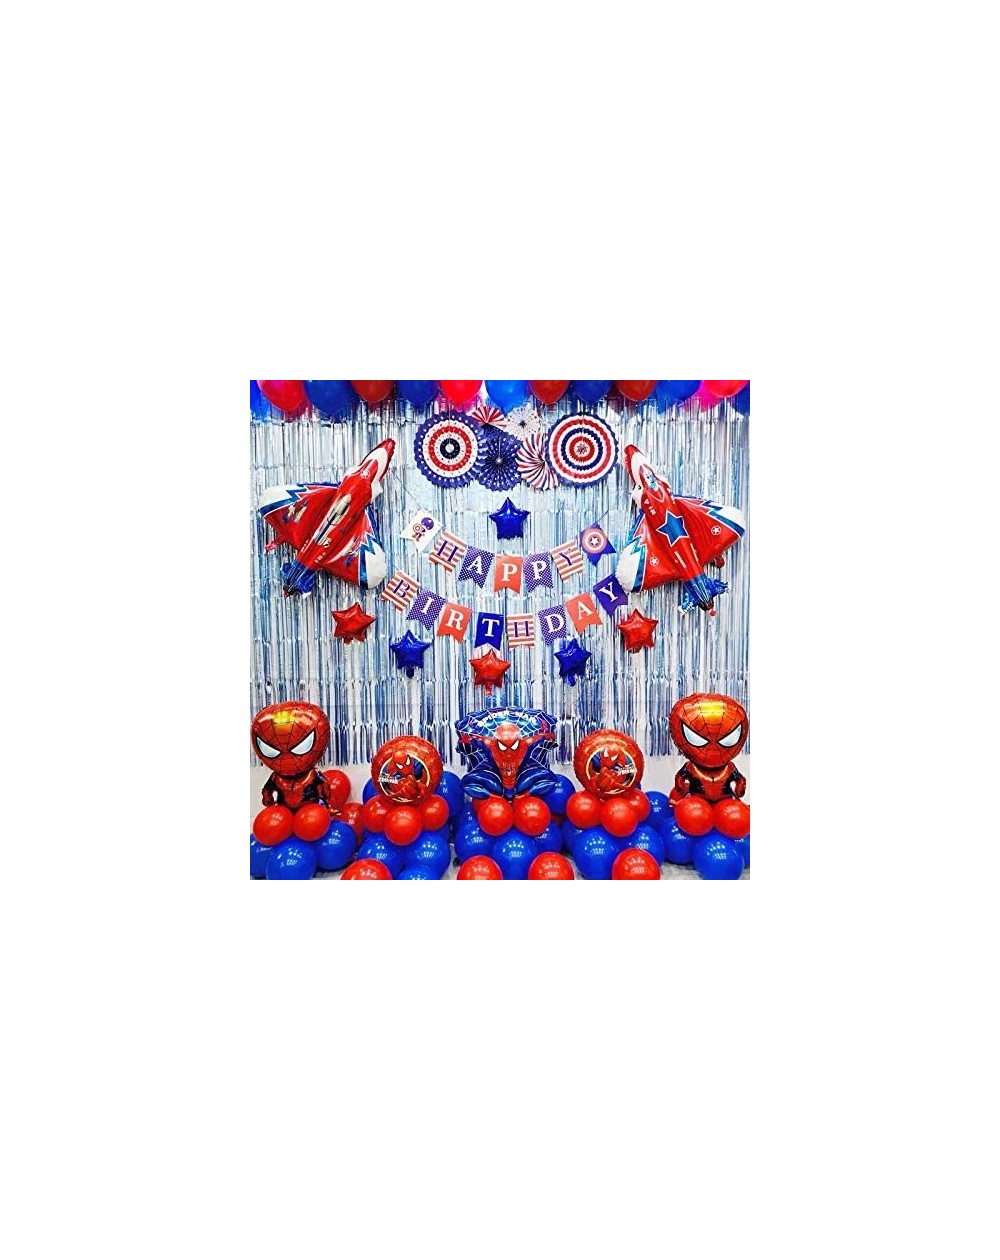 Balloons Spiderman Birthday party supplies Spiderman Birthday Party Decorations Superhero Theme Balloons set included 85 Pcs ...